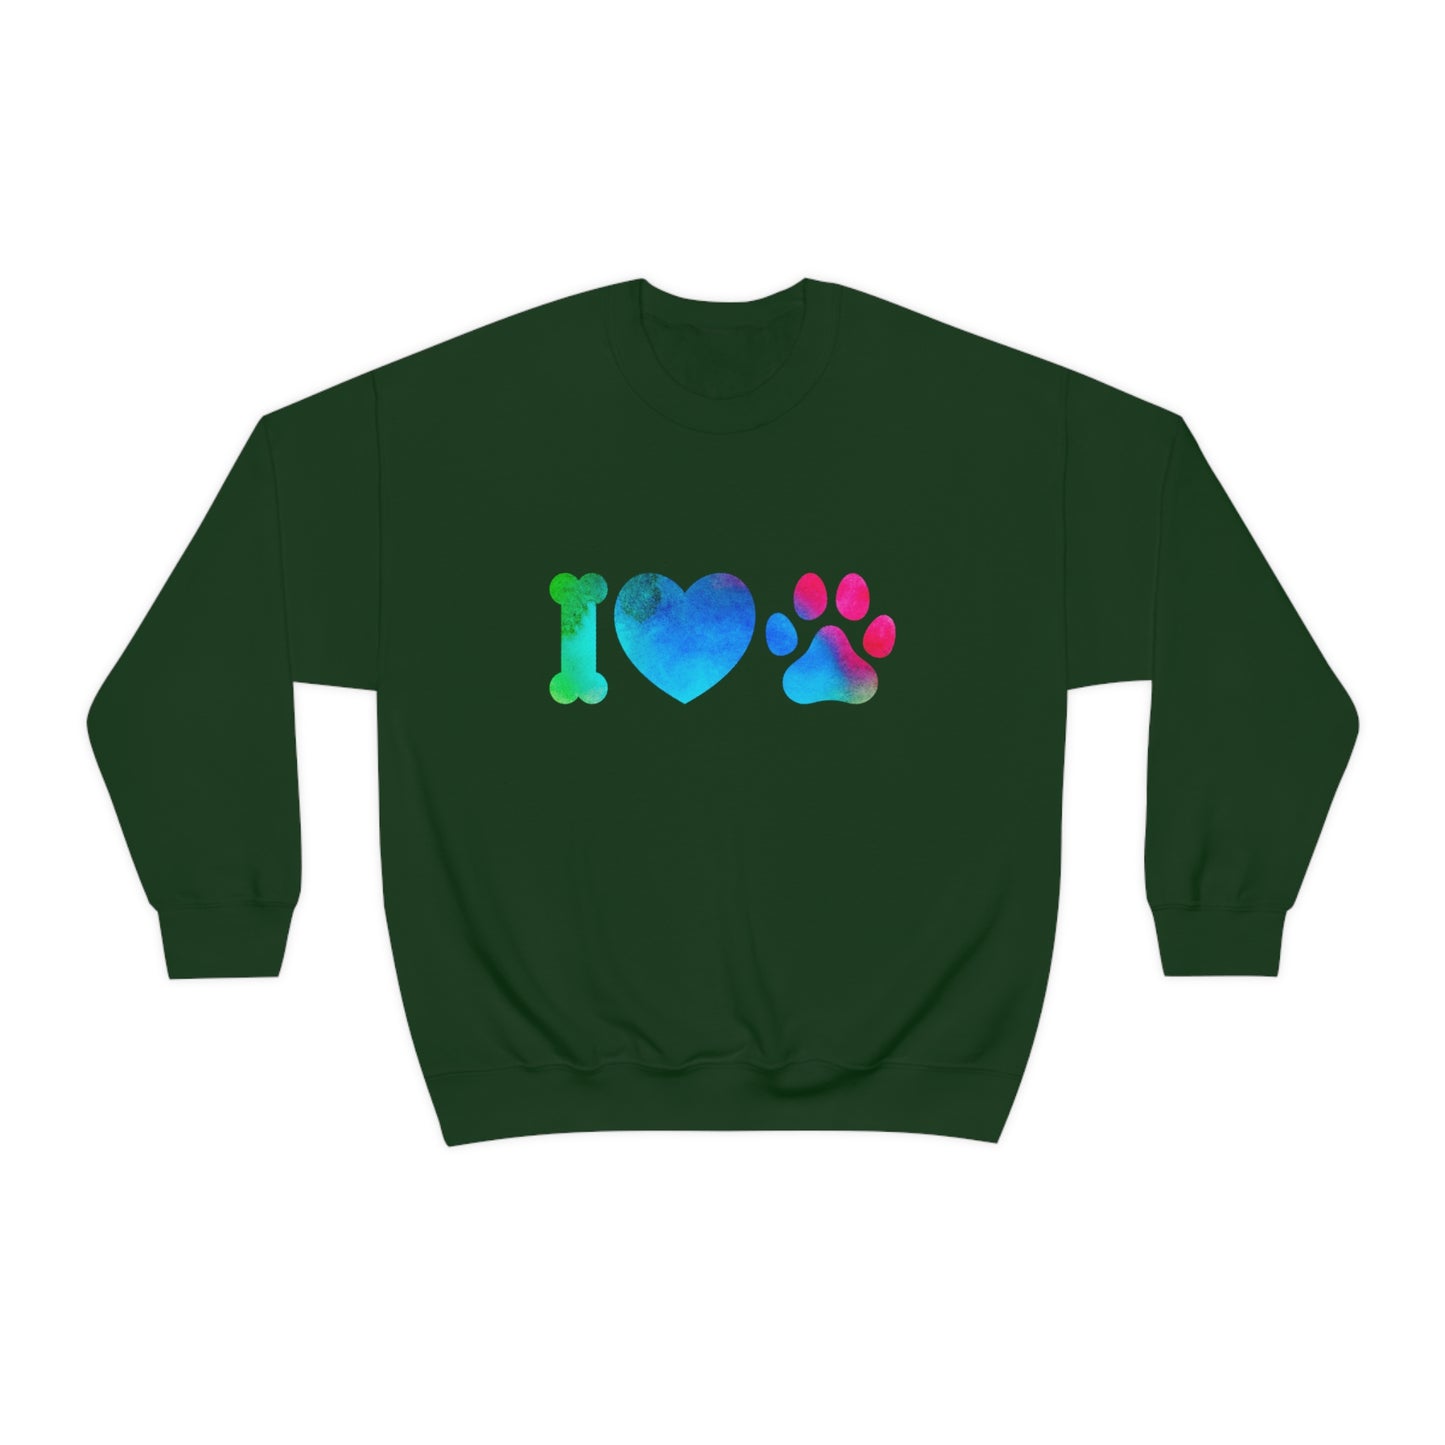 Flat front view of the Forest Green shirt